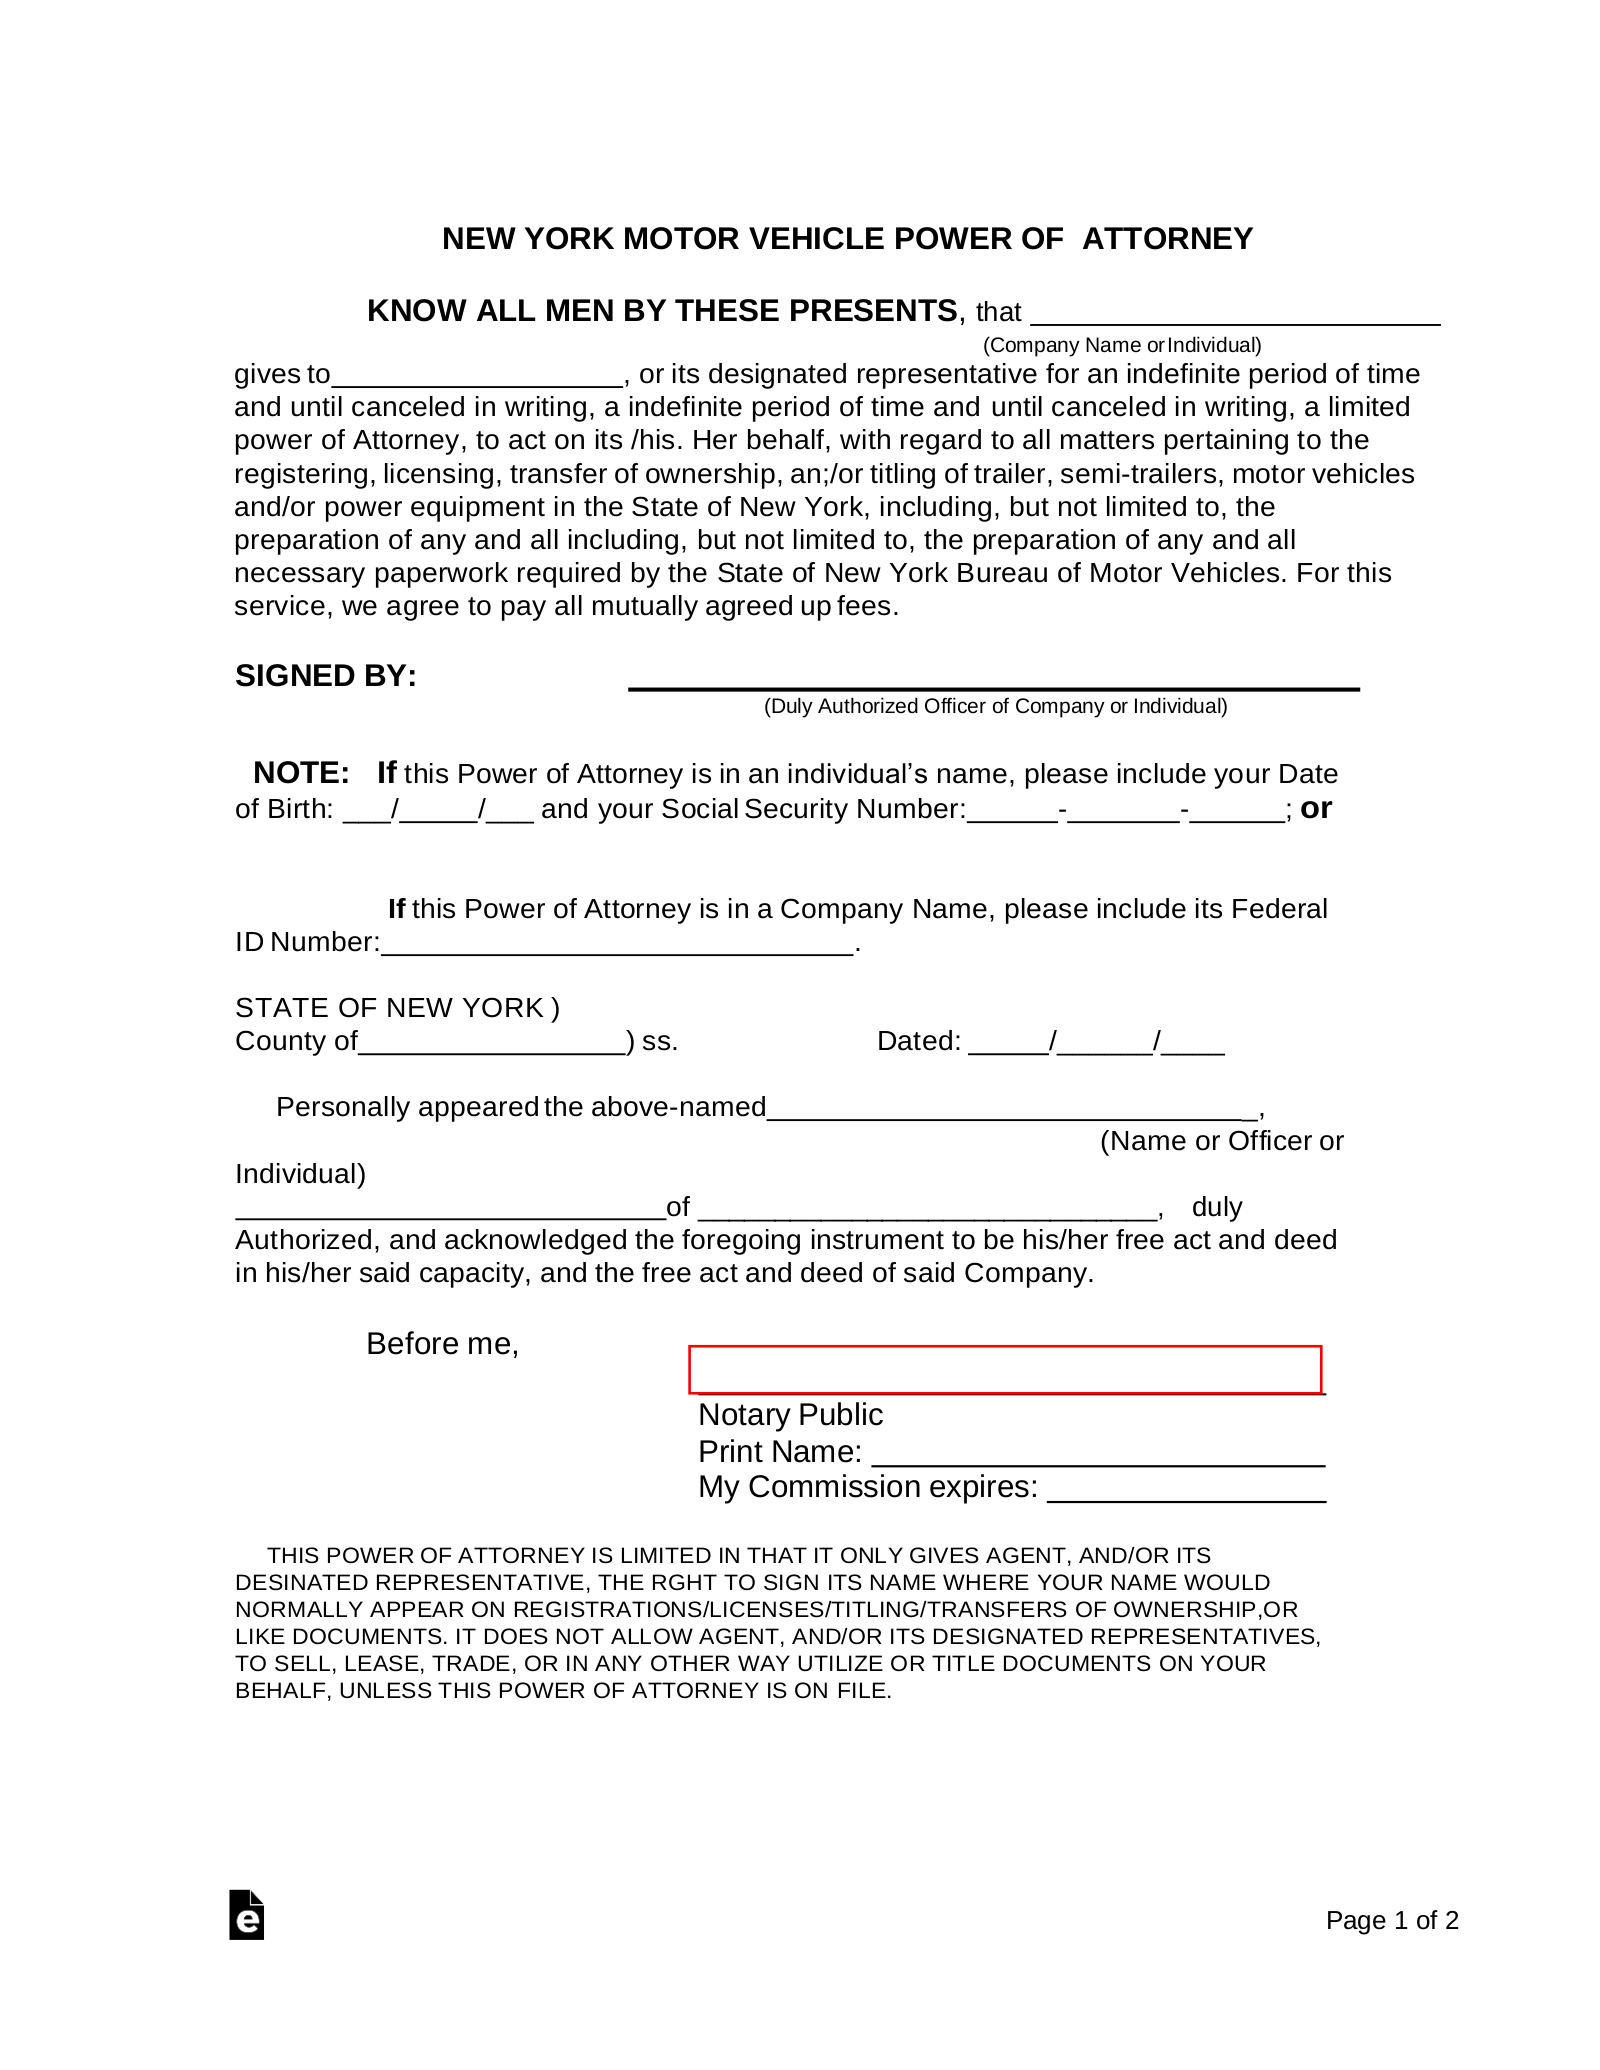 fillable power of attorney form ny
 Free New York Motor Vehicle Power of Attorney Form - PDF ...